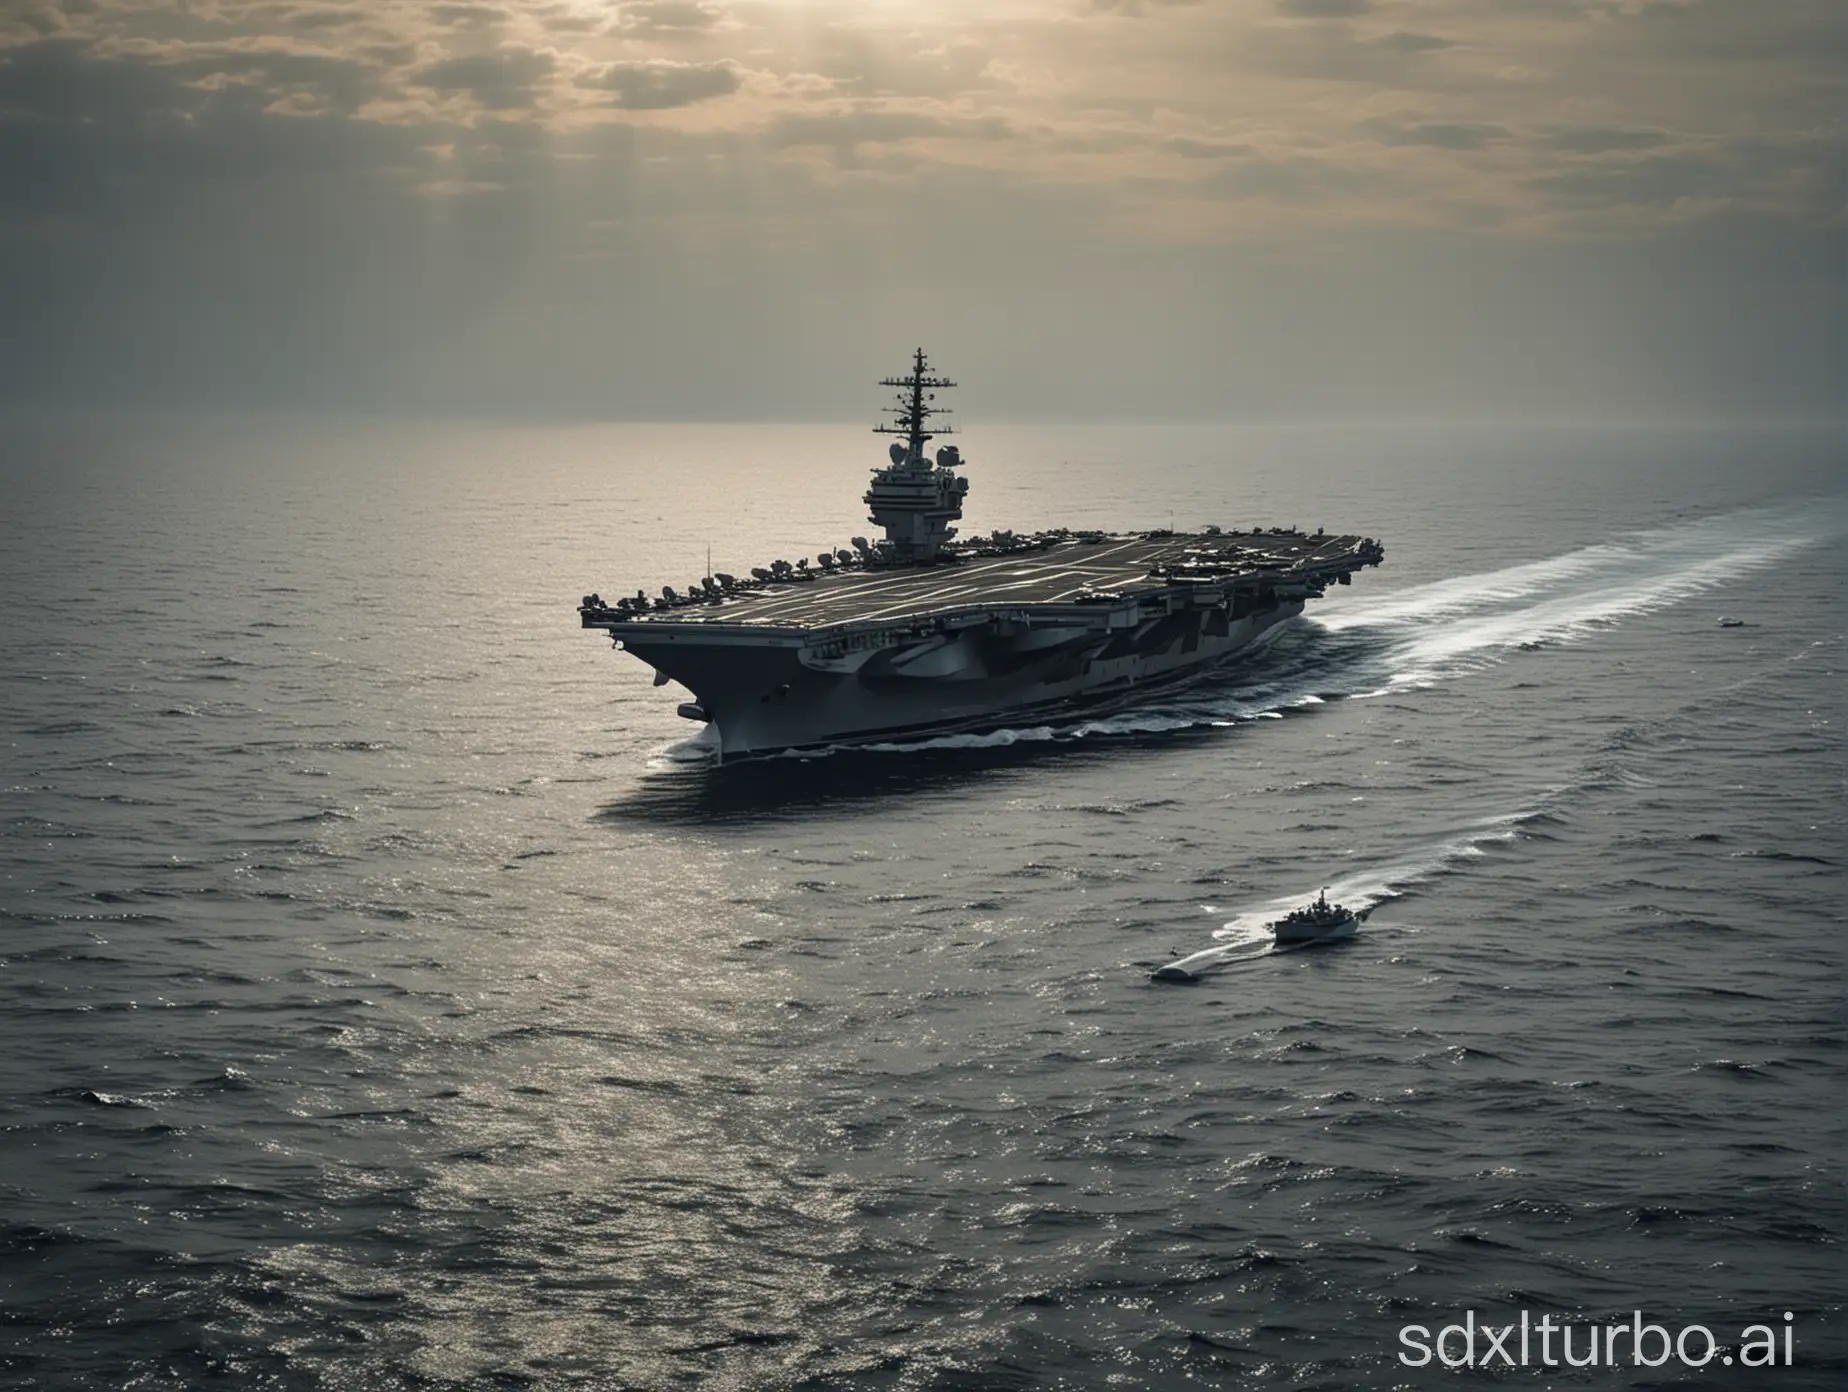 Majestic-Aircraft-Carrier-Sailing-Across-the-Vast-Ocean